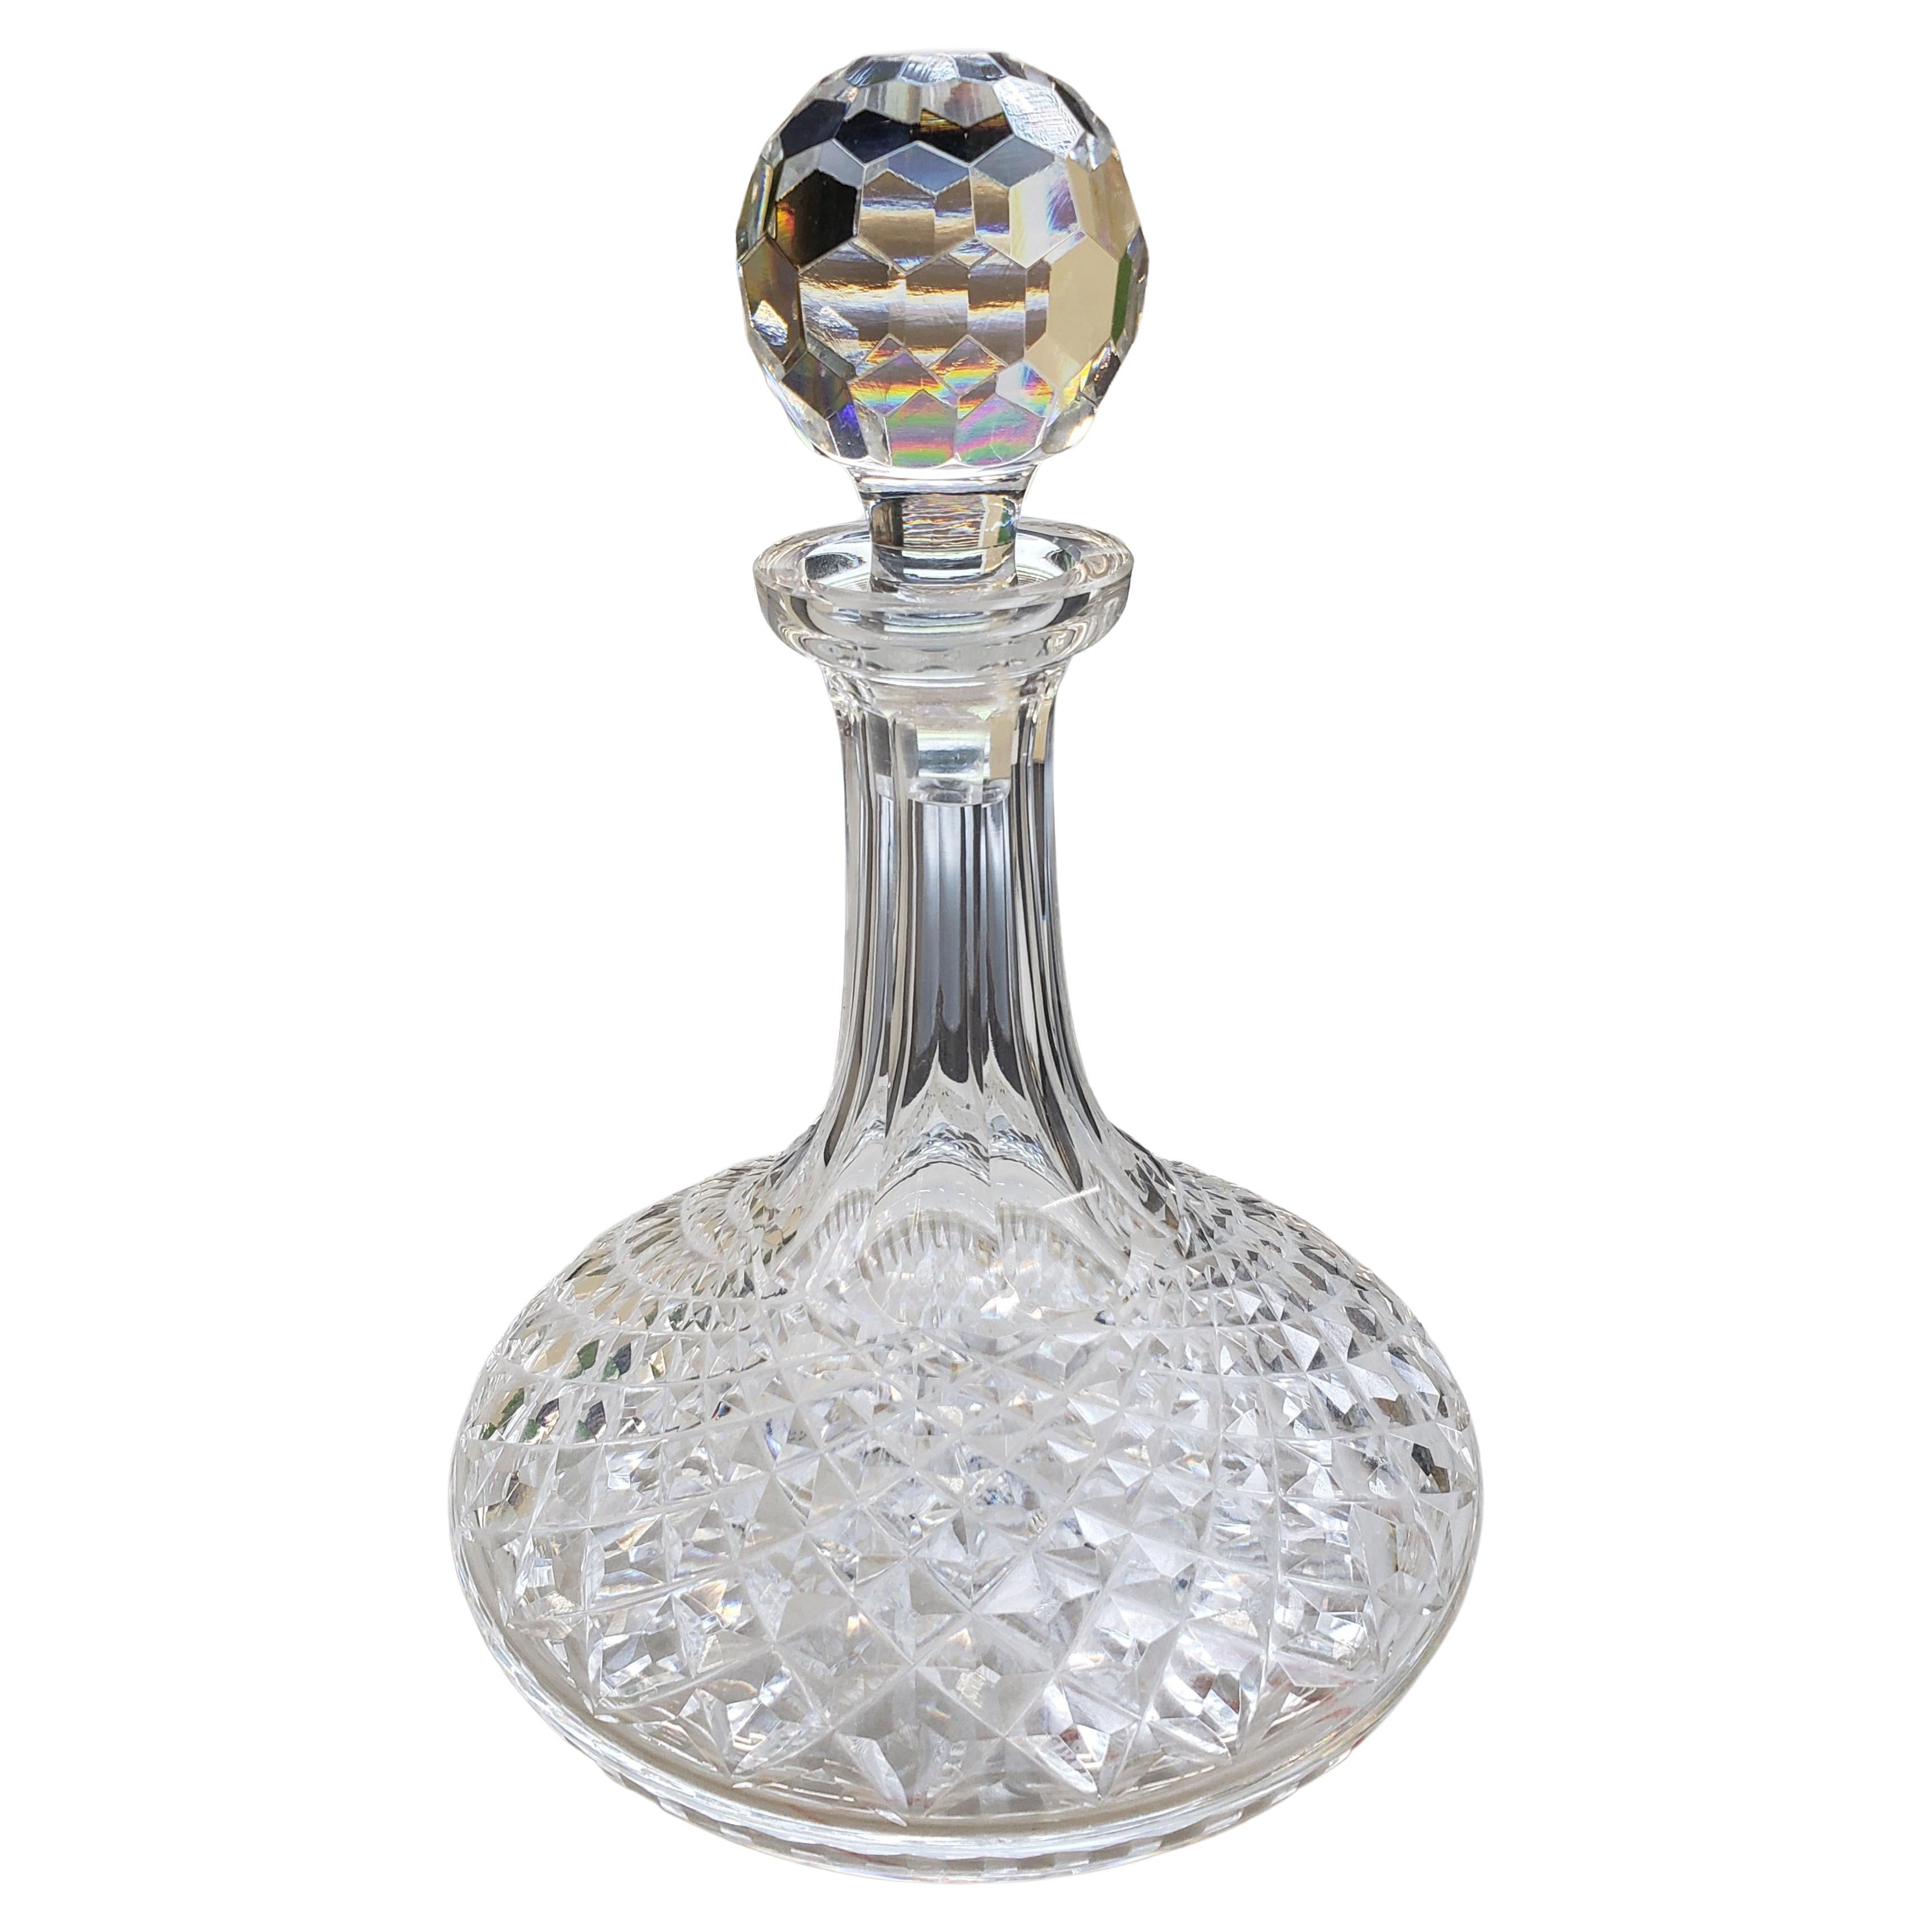 Is any Waterford crystal still made in Ireland?